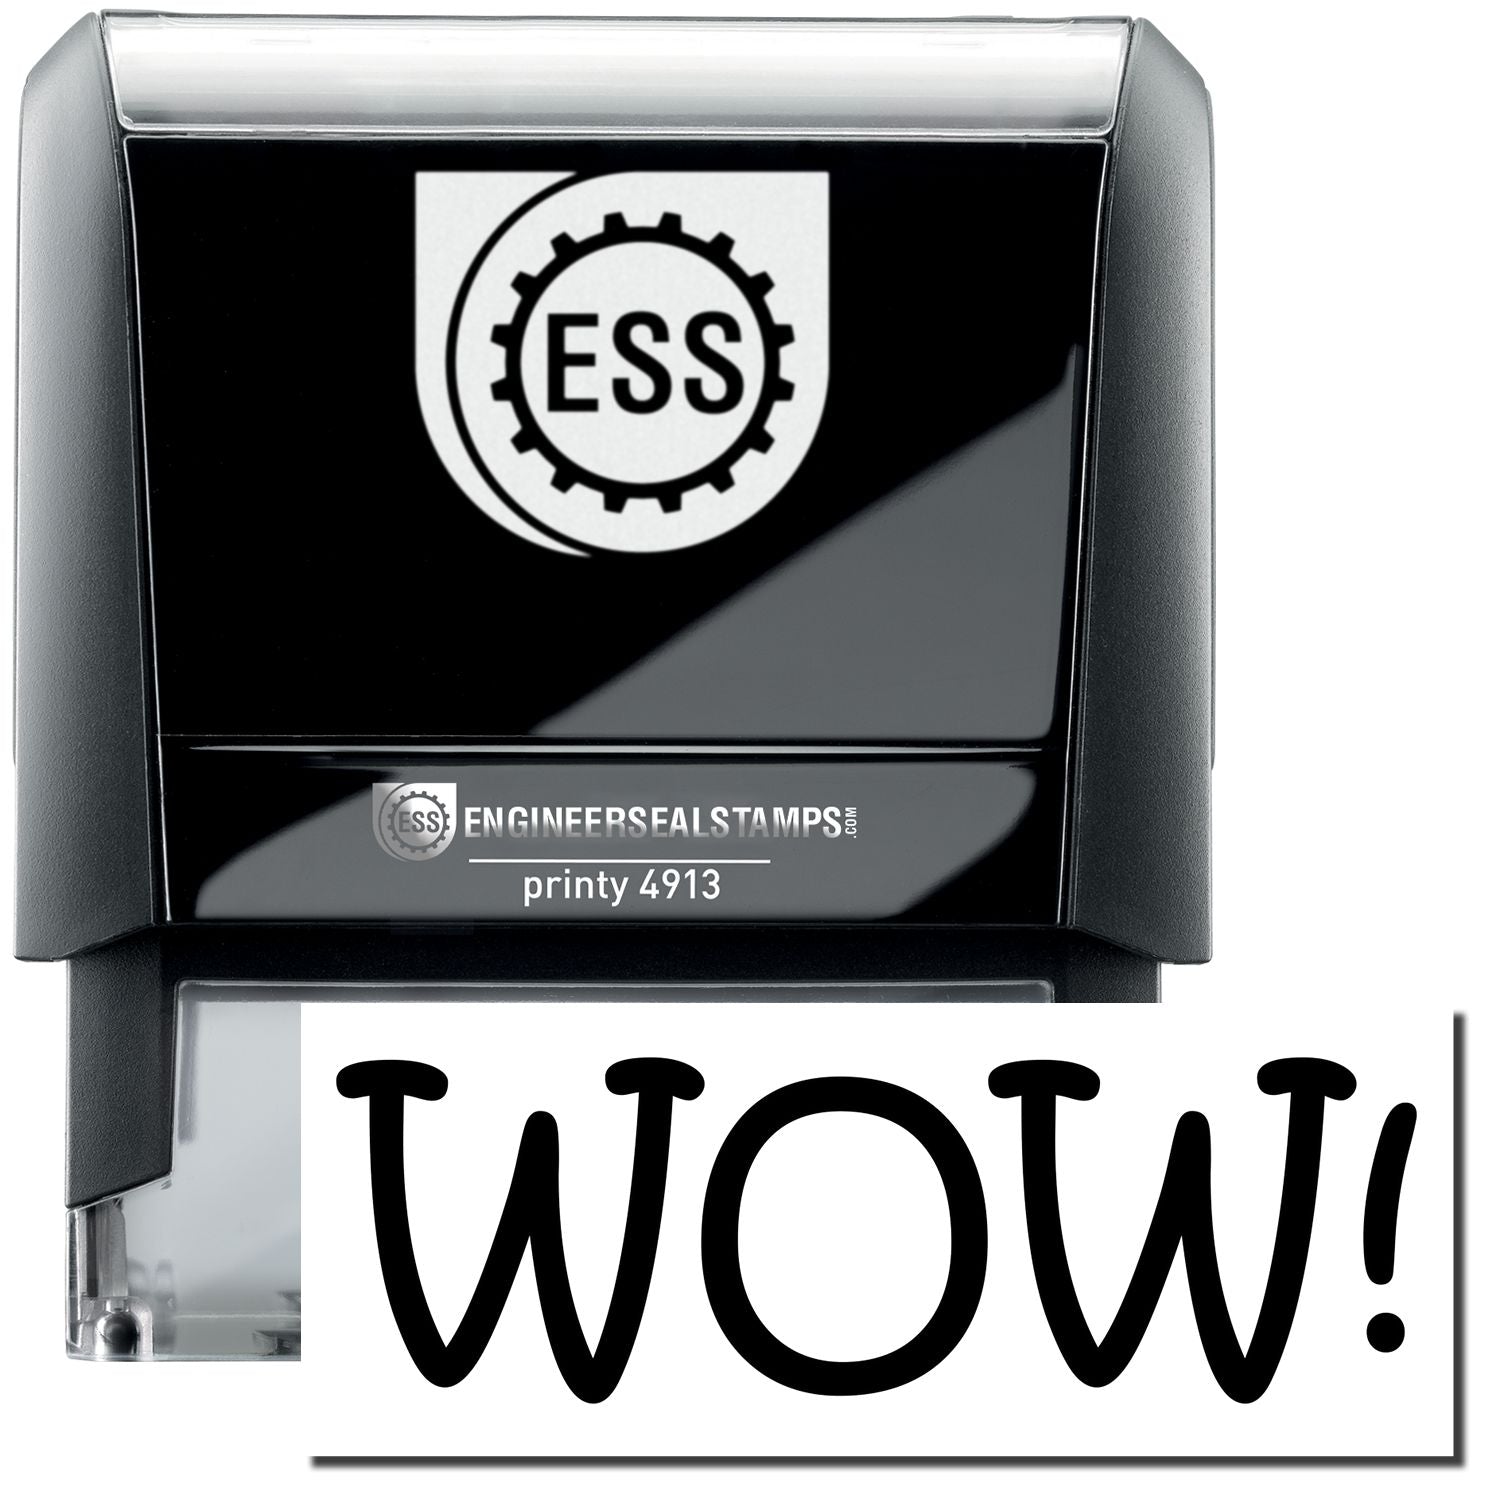 A self-inking stamp with a stamped image showing how the text "WOW!" in a large bold font is displayed by it after stamping.